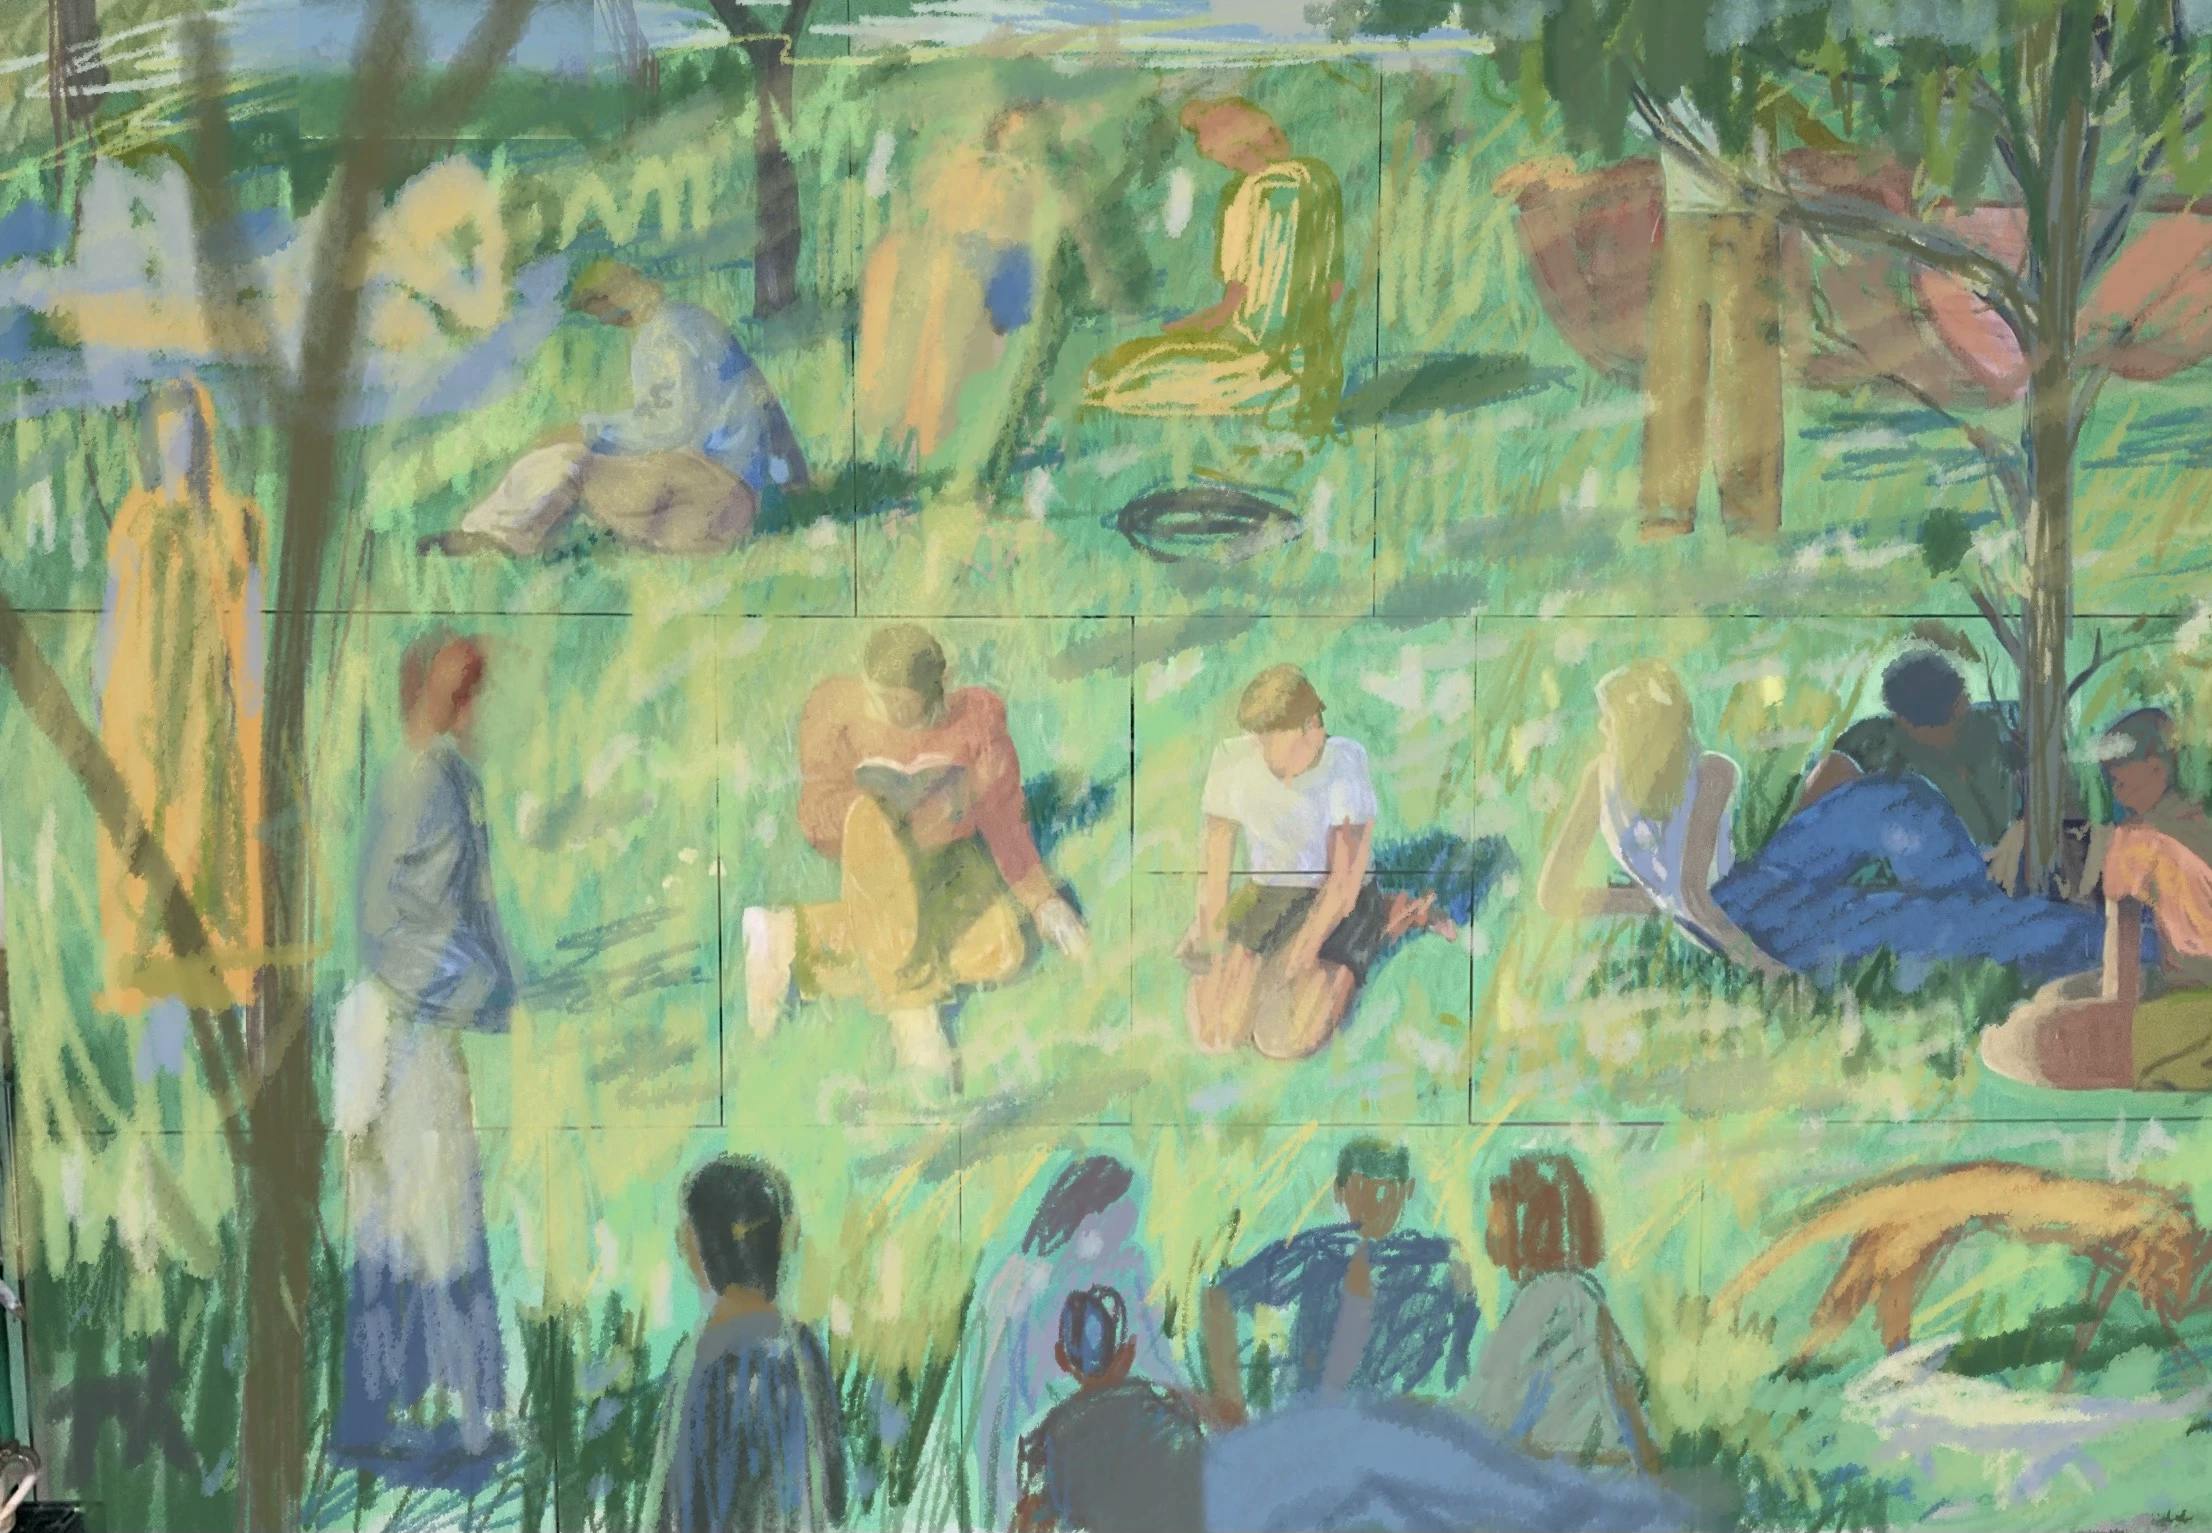 An uncompleted version of artist Jackson Joyce's large-scale installation comprised of individual paintings of figures in a grassy park.